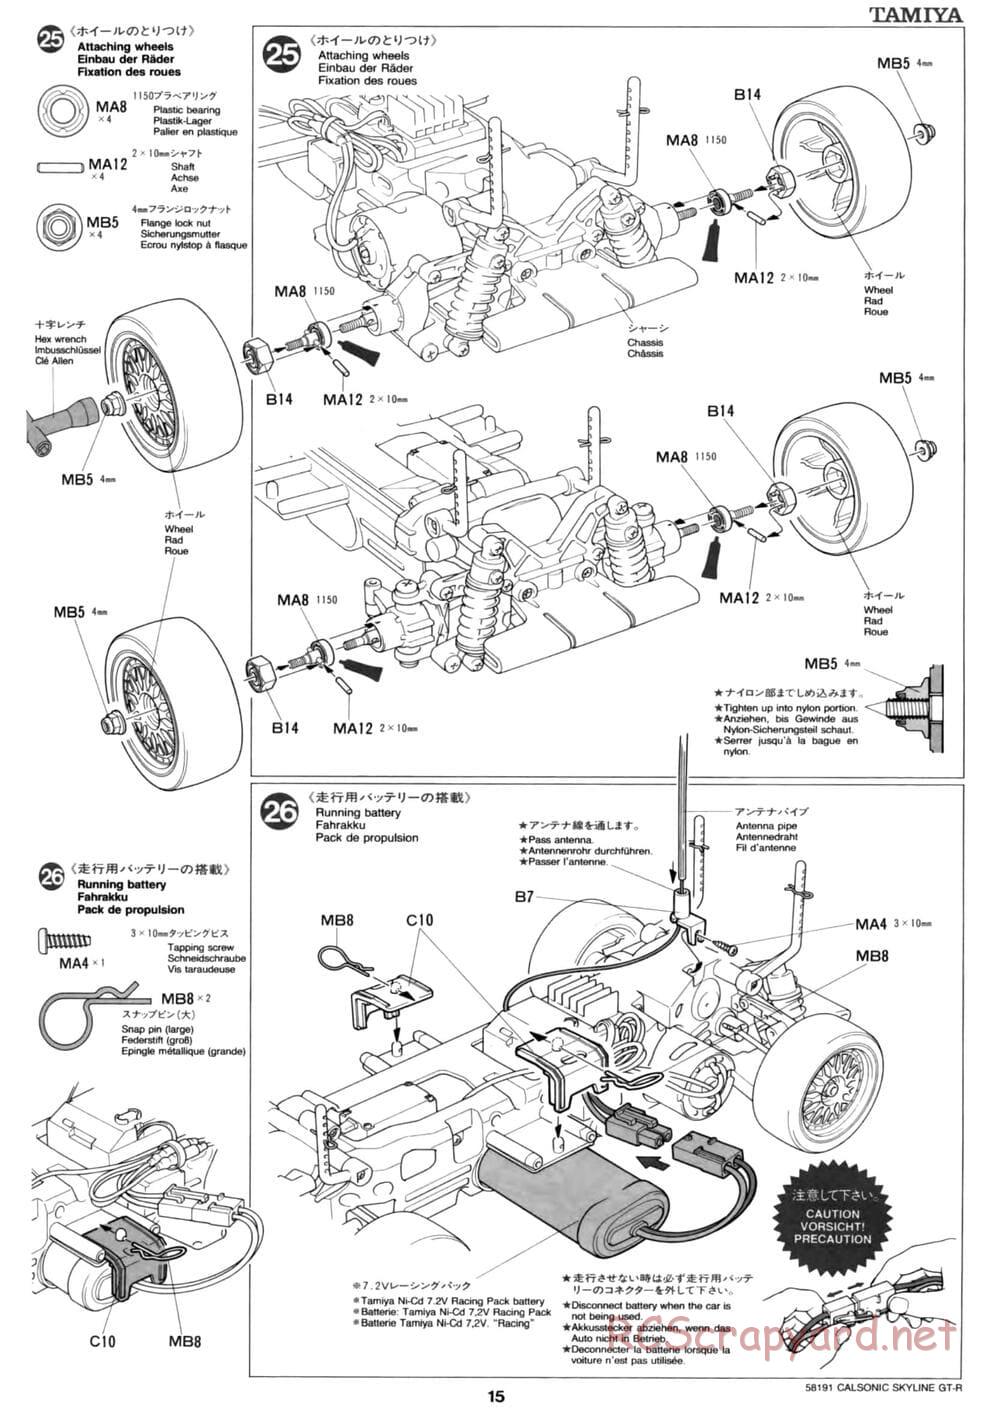 Tamiya - Calsonic Skyline GT-R - TL-01 Chassis - Manual - Page 15